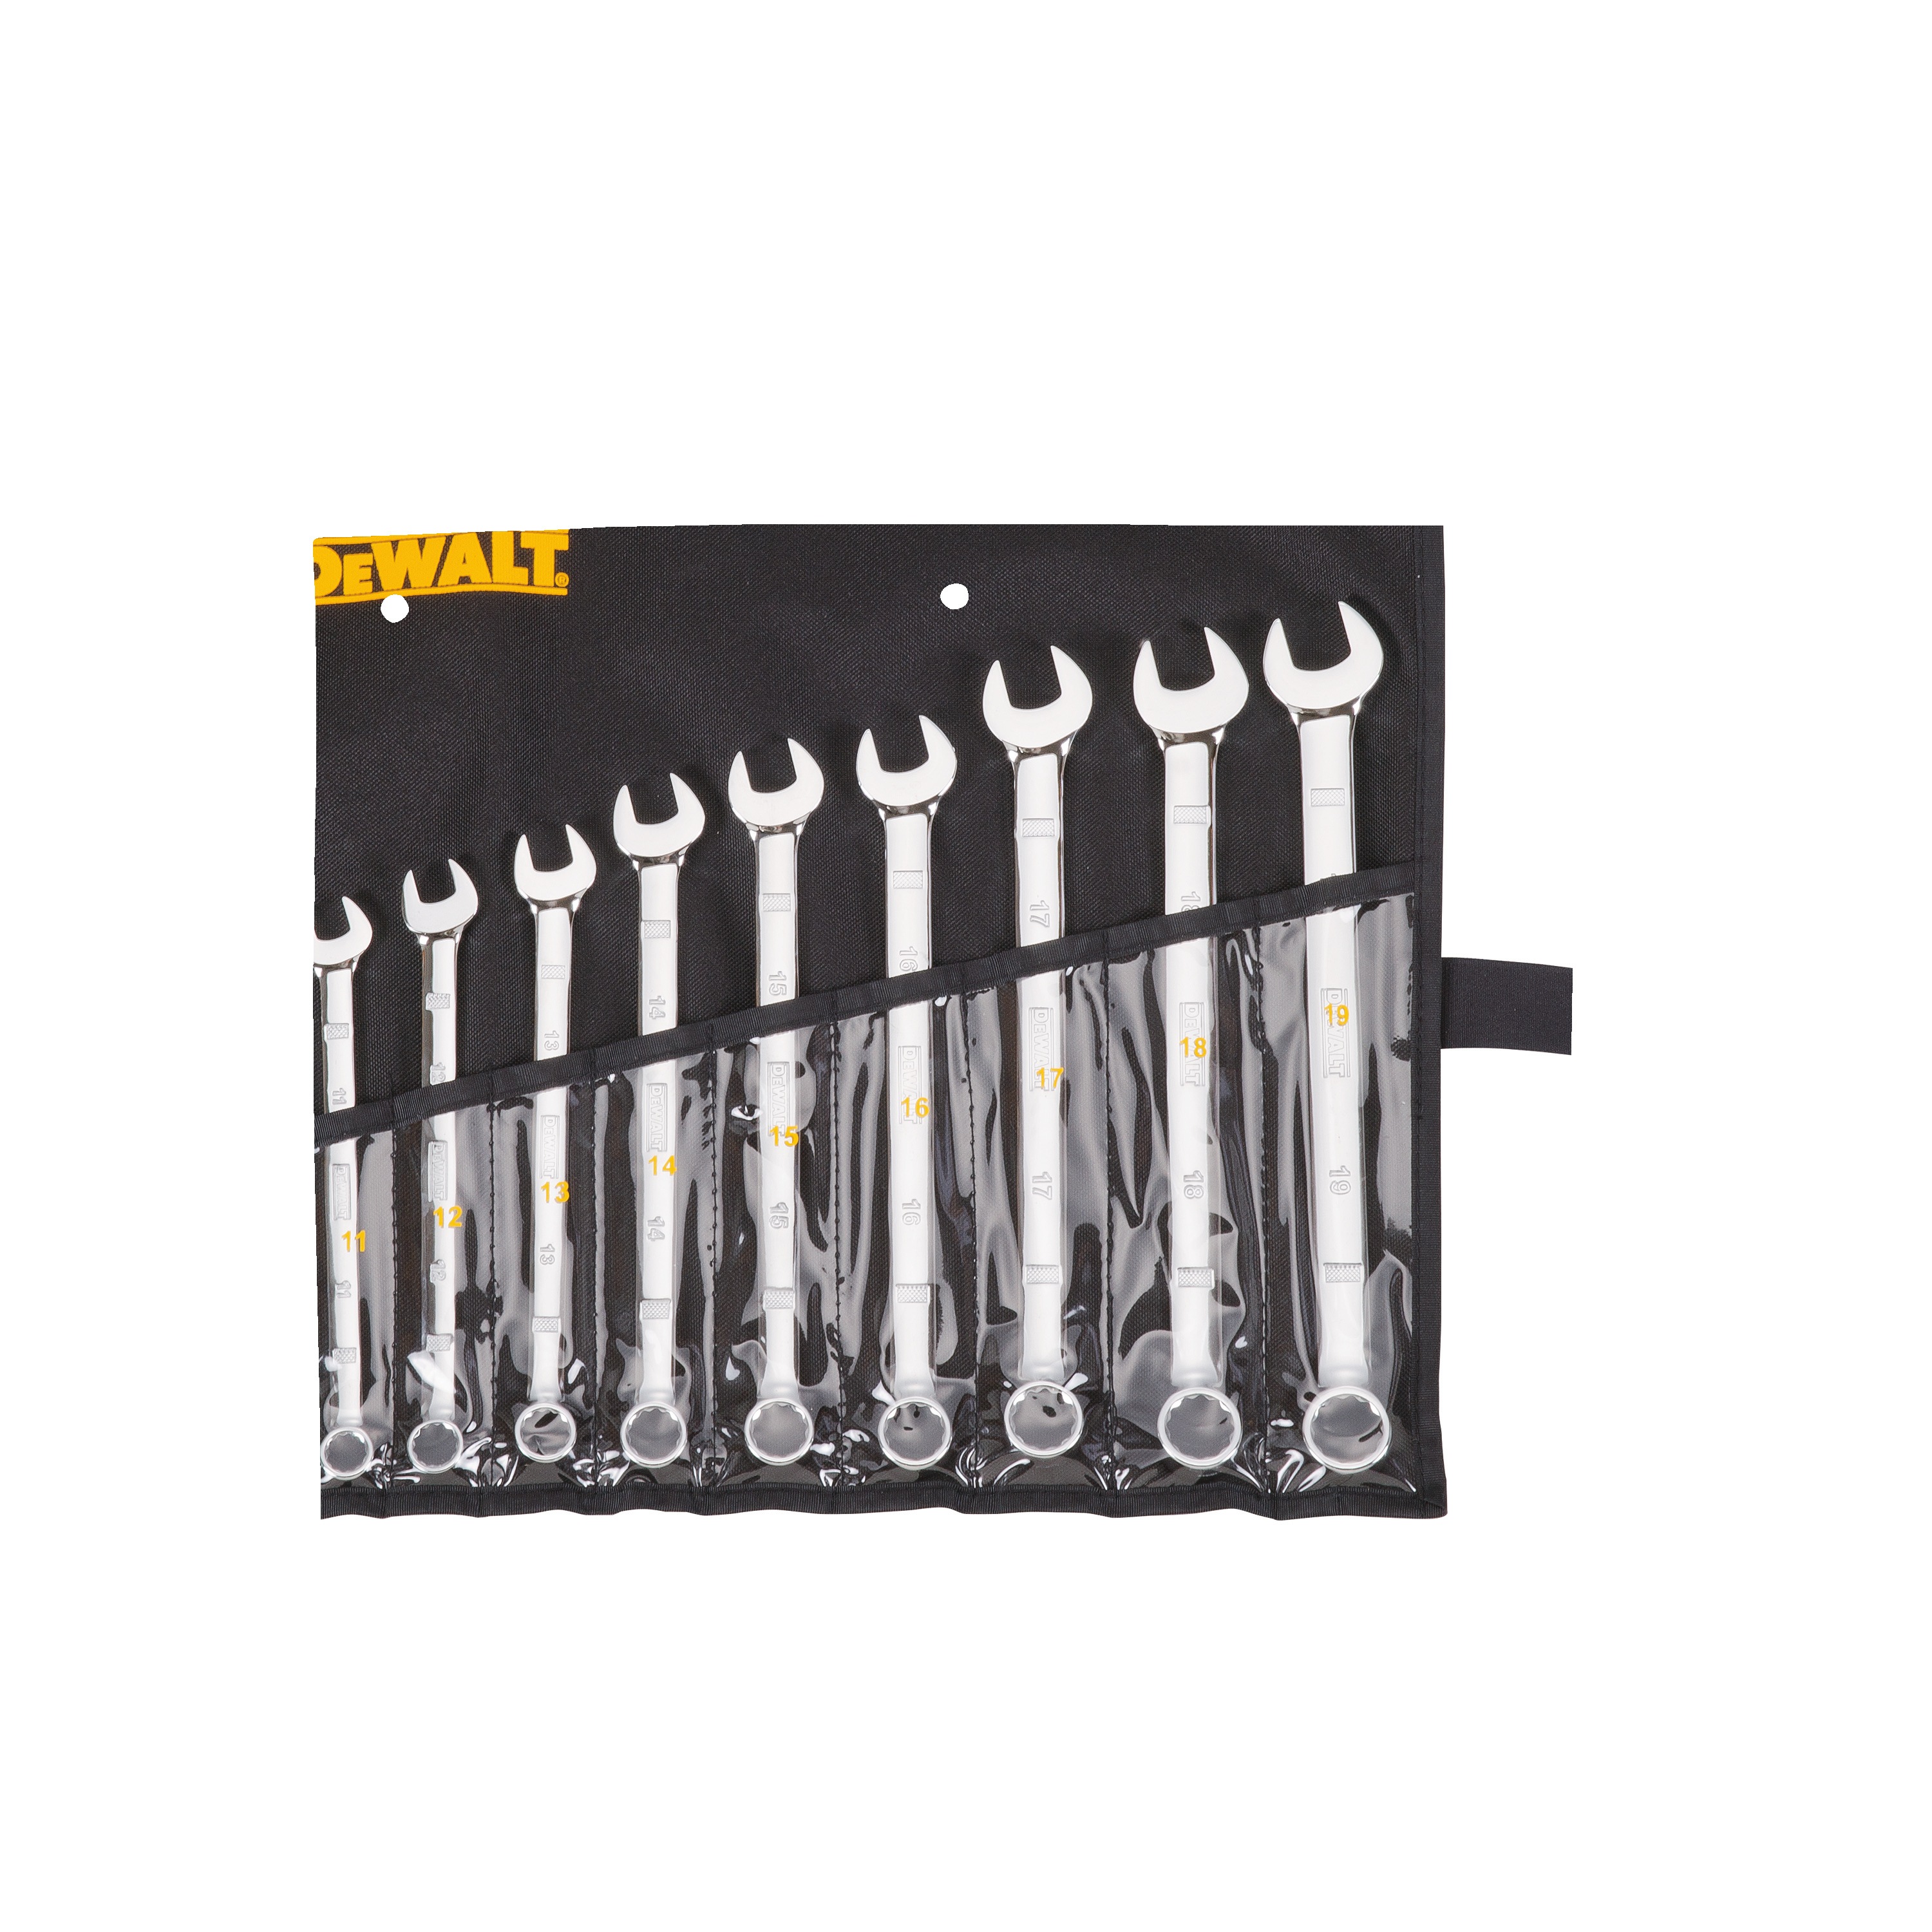 DEWALT 10 piece combination metric wrench set assembled in its kit.